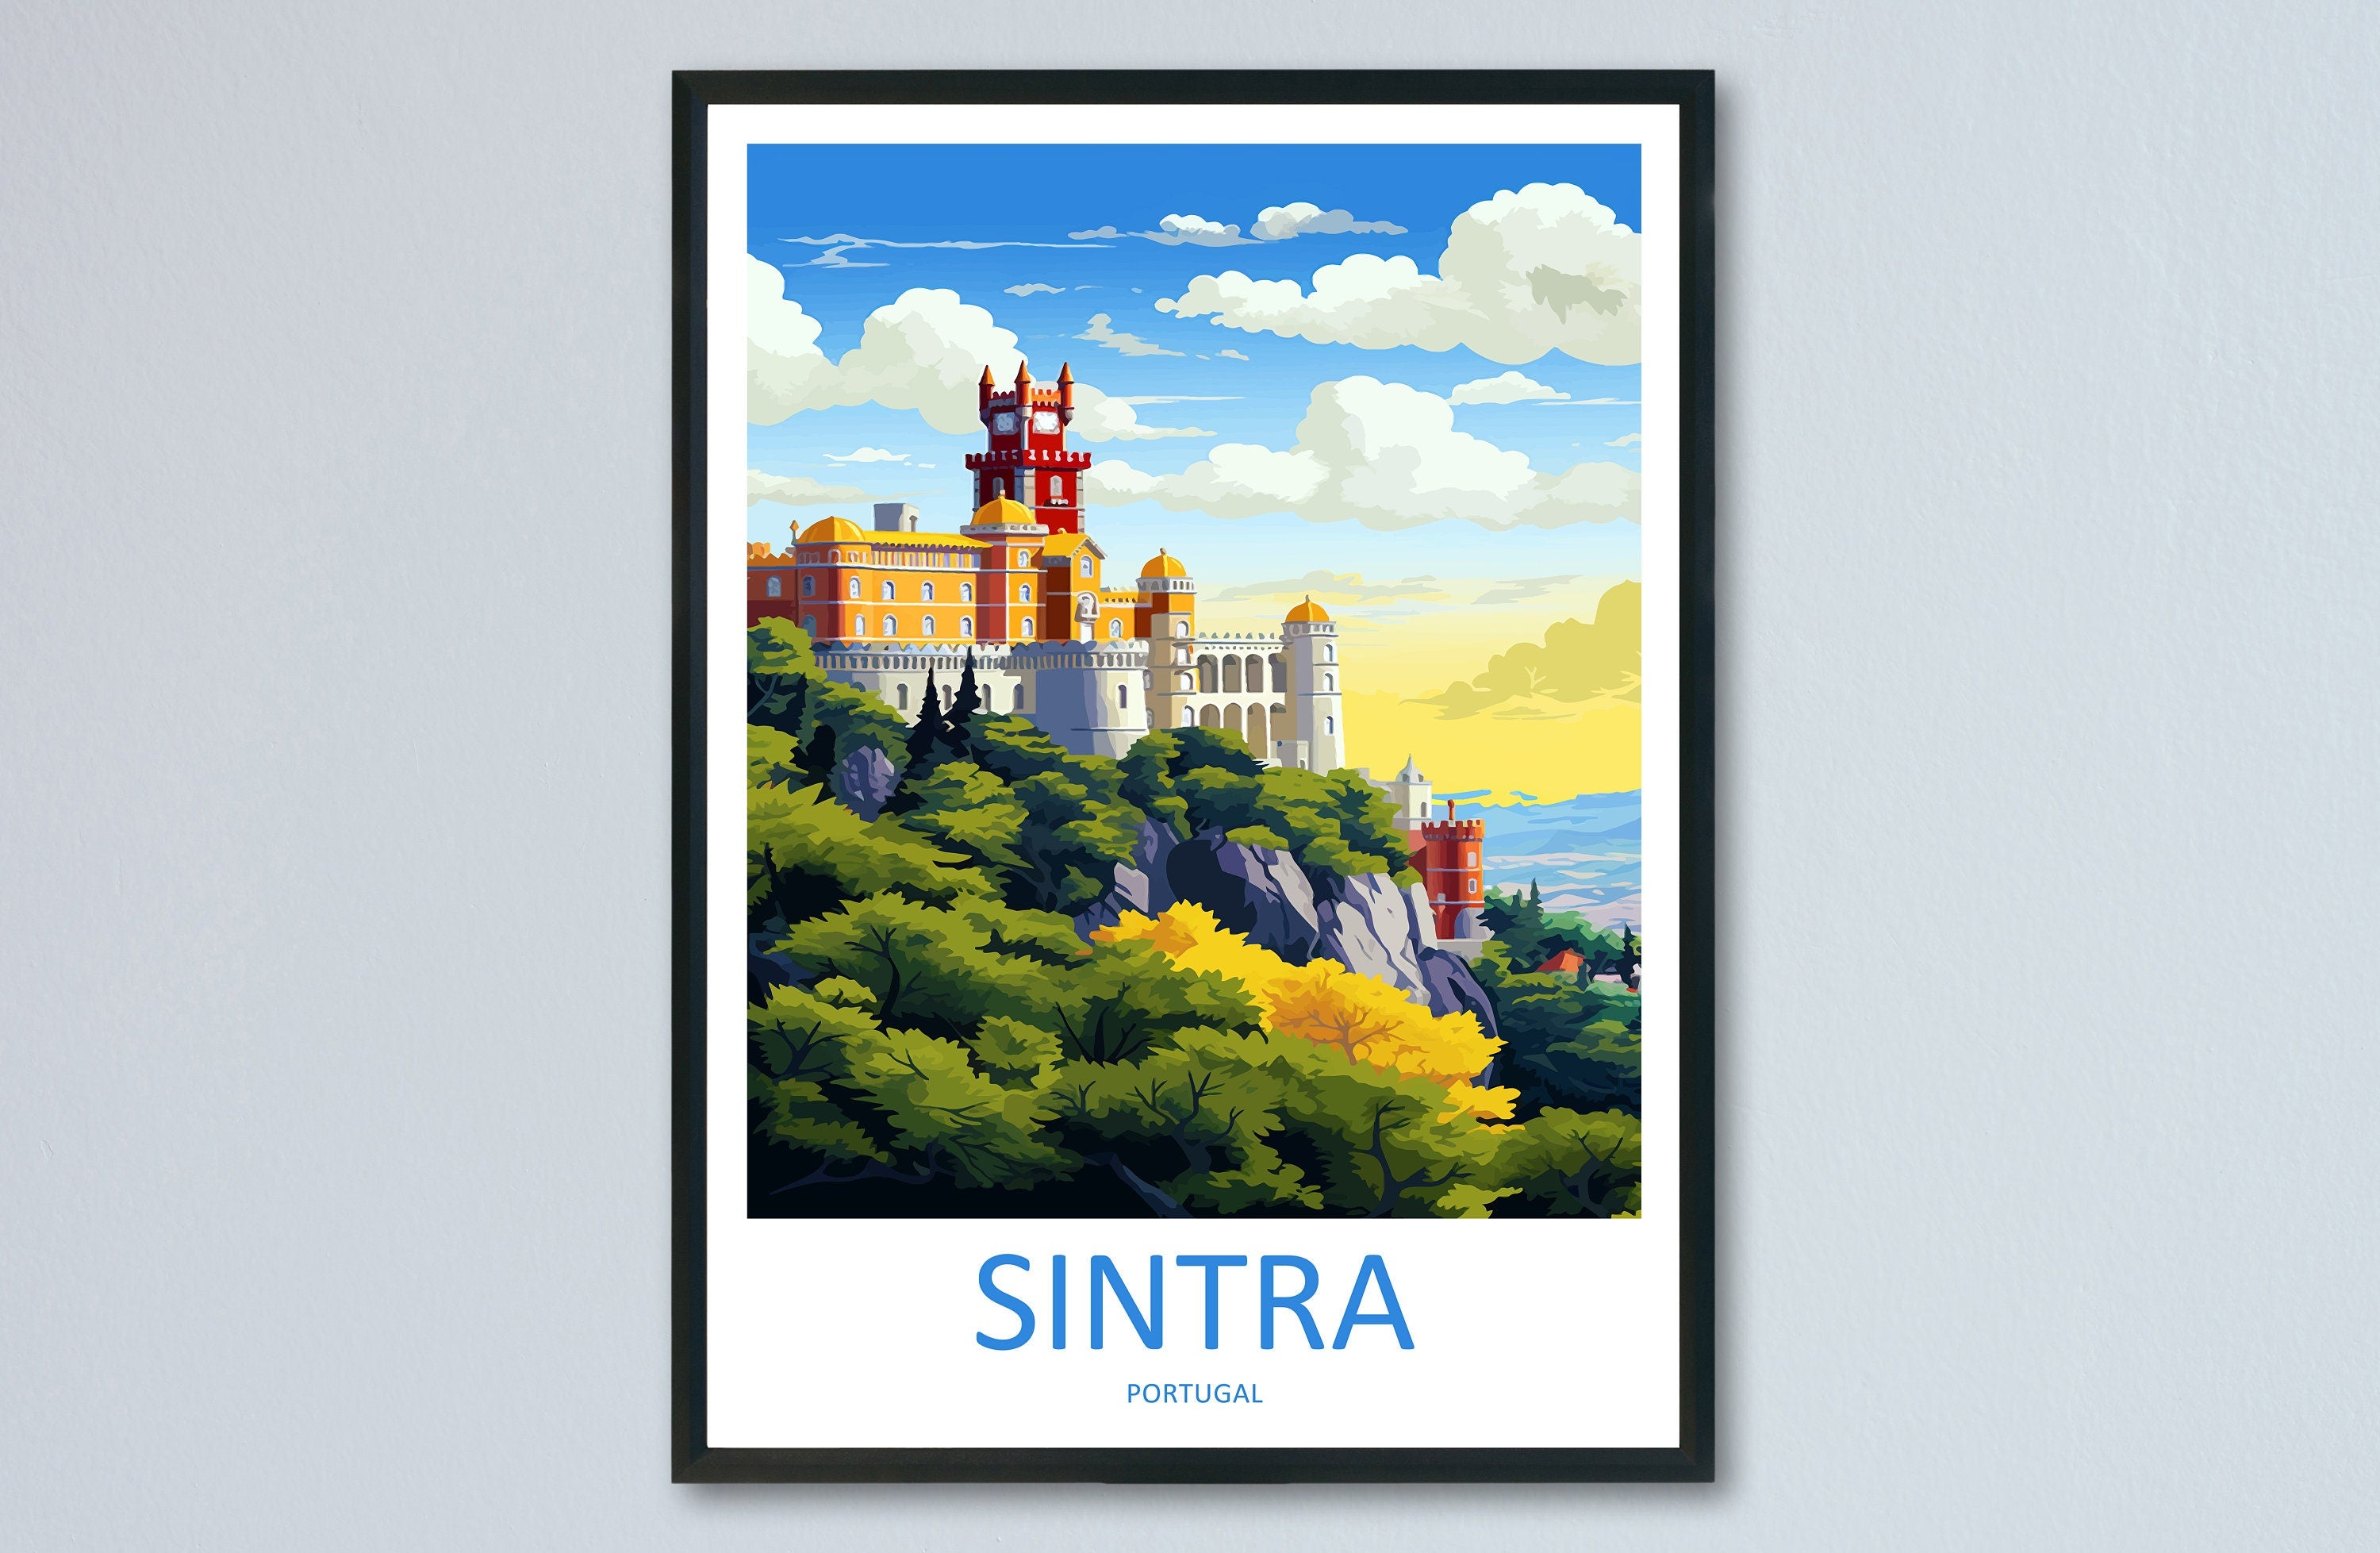 Sintra Travel Print Wall Art Sintra Wall Hanging Home Décor Sintra Gift Art Lovers Portugal Art Lover Gift Sintra Wall Décor Sintra Travel